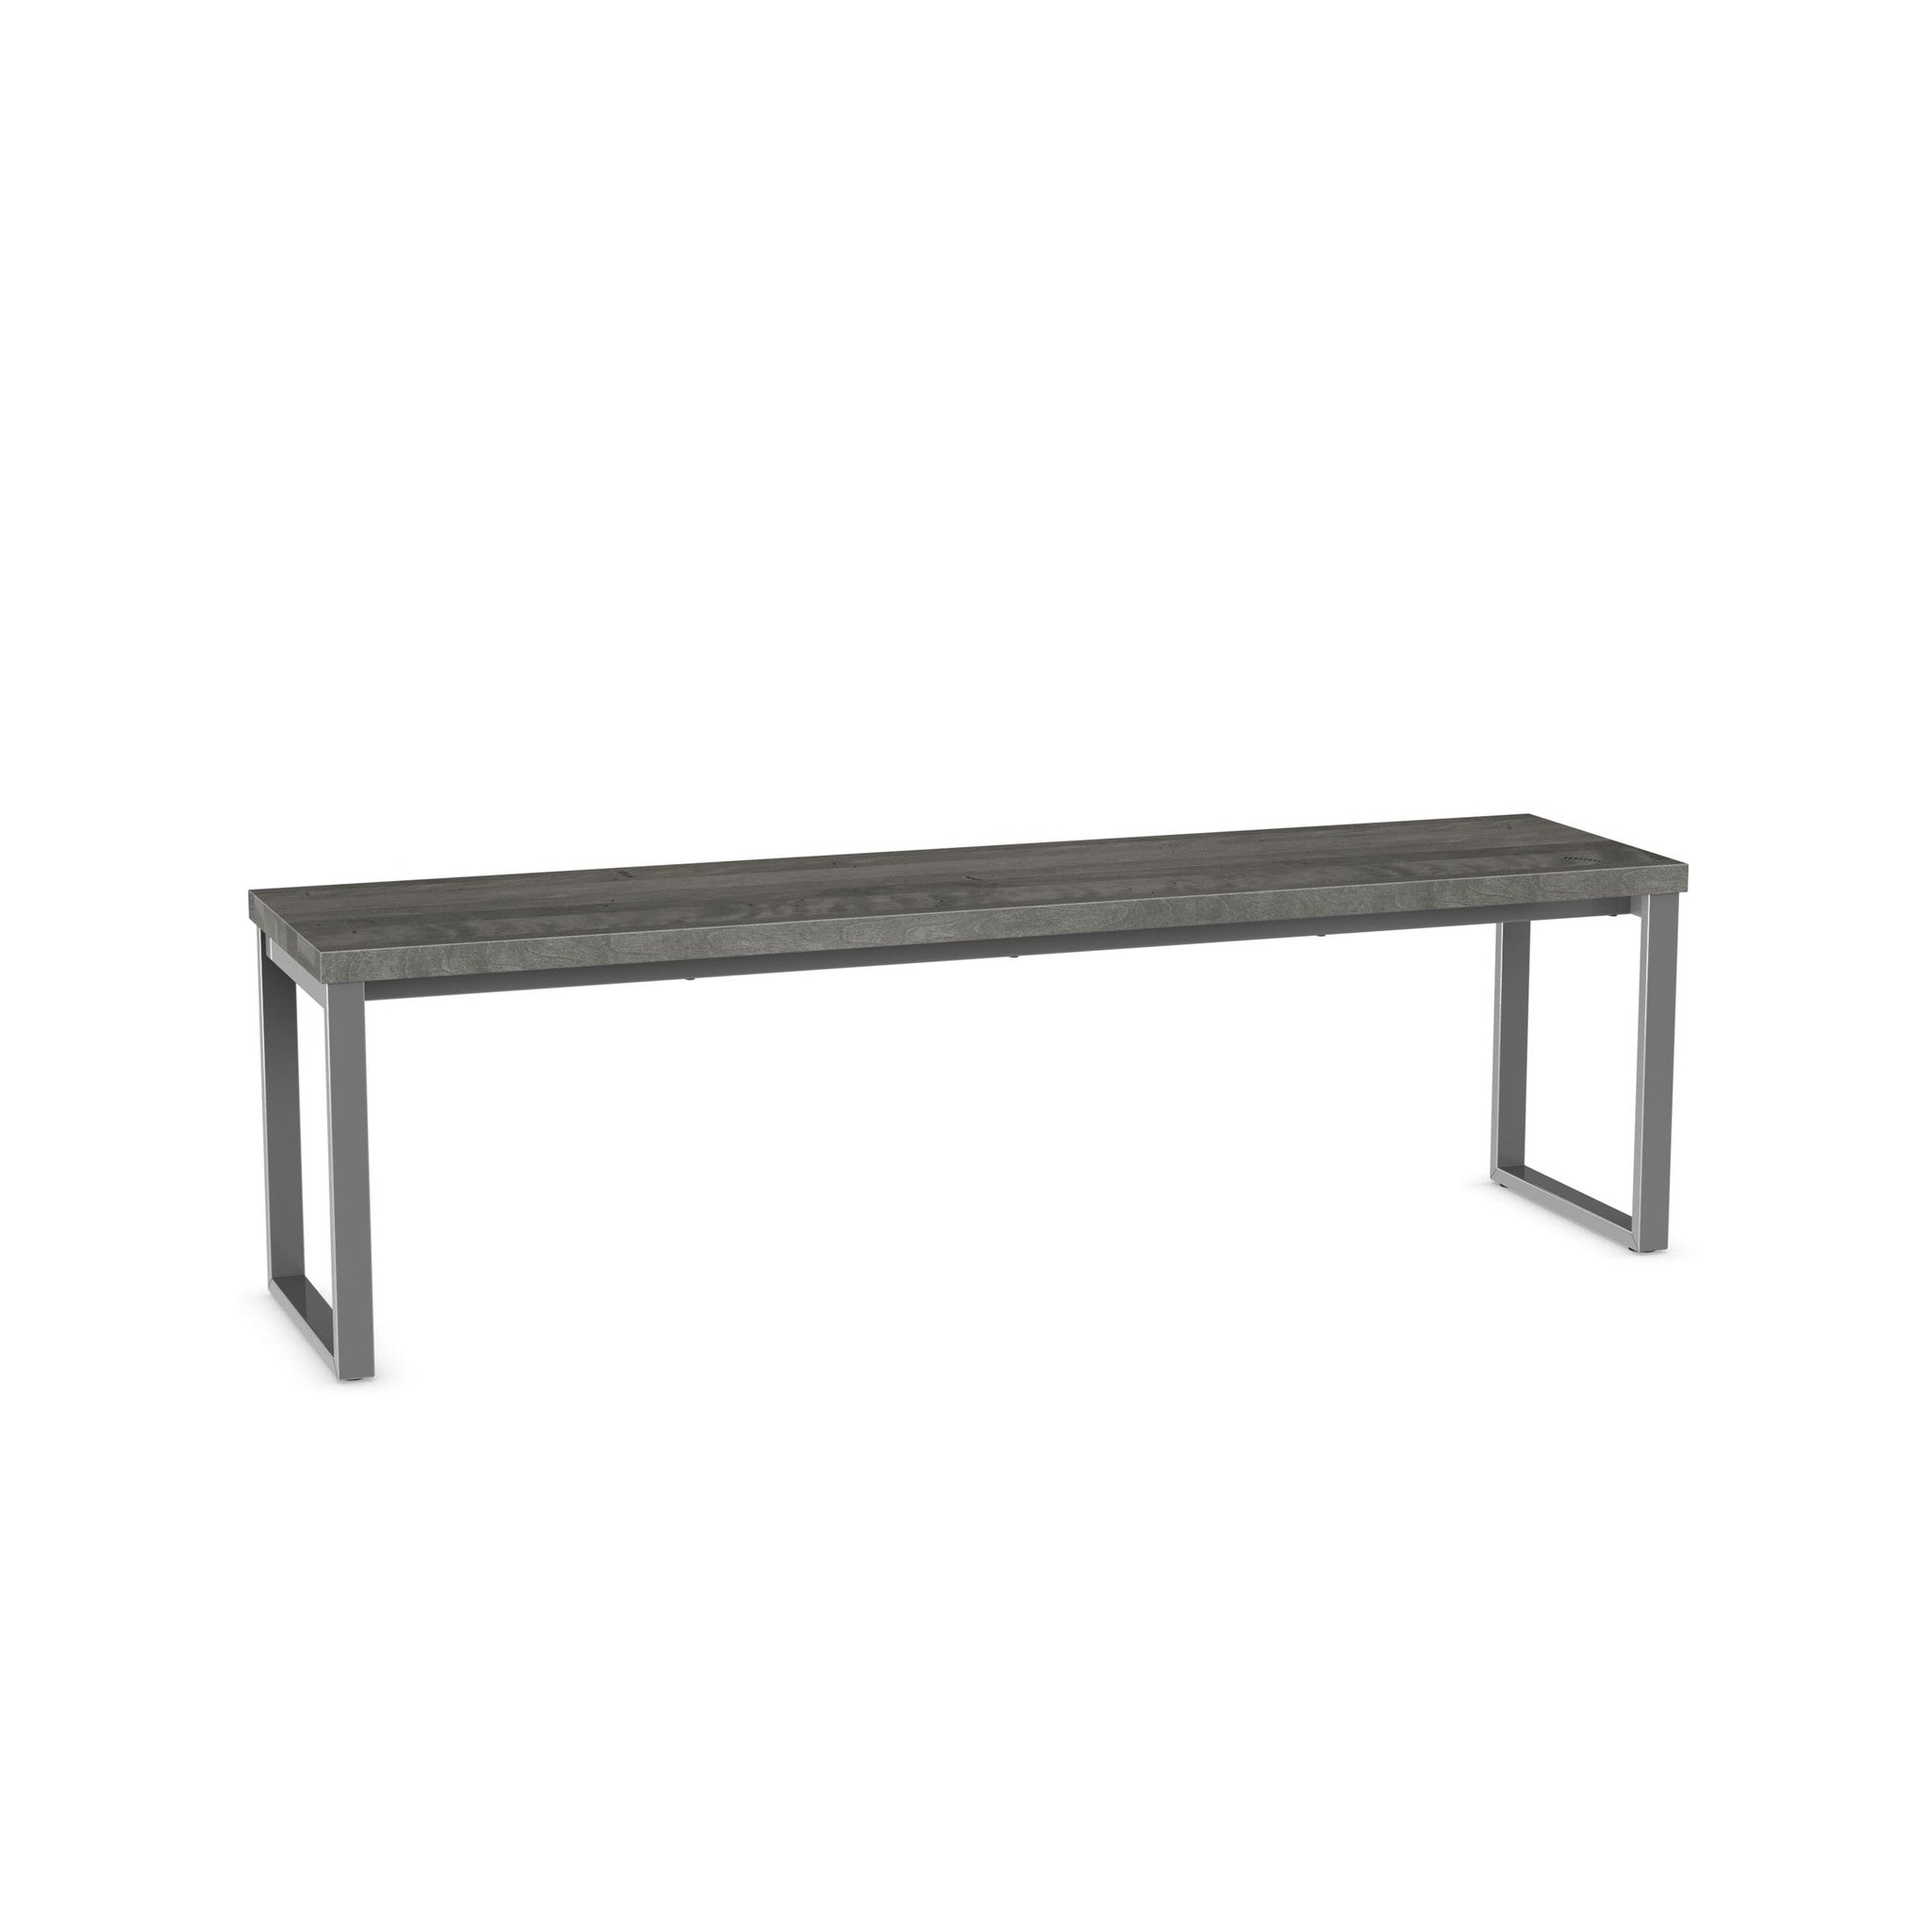 Picture of Dryden Bench - Wood - 44"